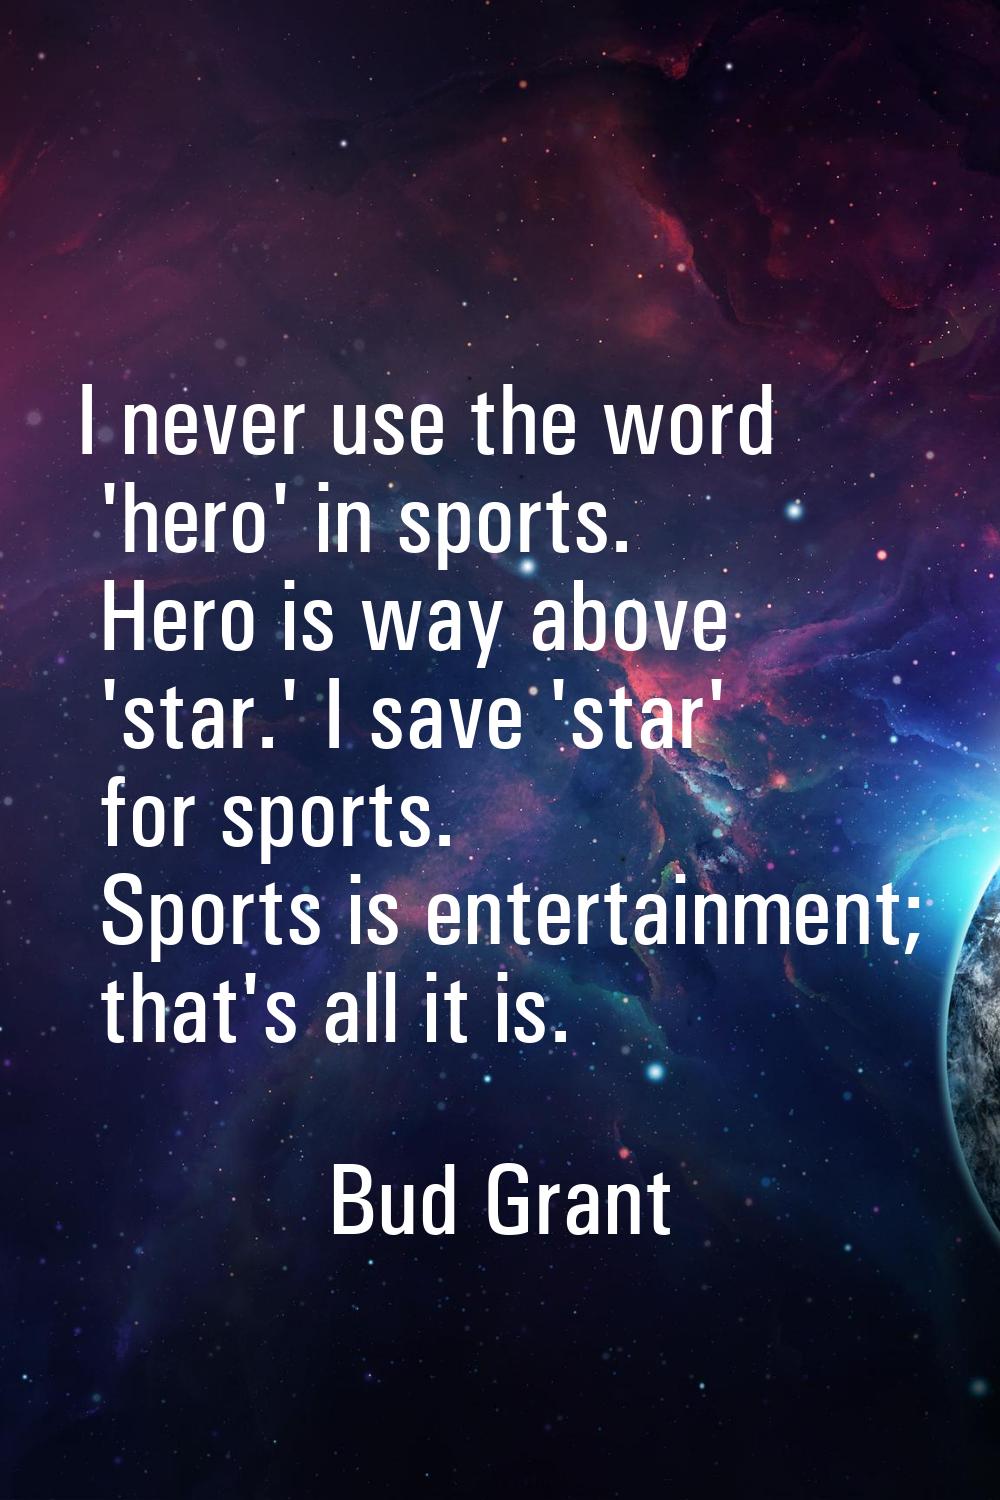 I never use the word 'hero' in sports. Hero is way above 'star.' I save 'star' for sports. Sports i